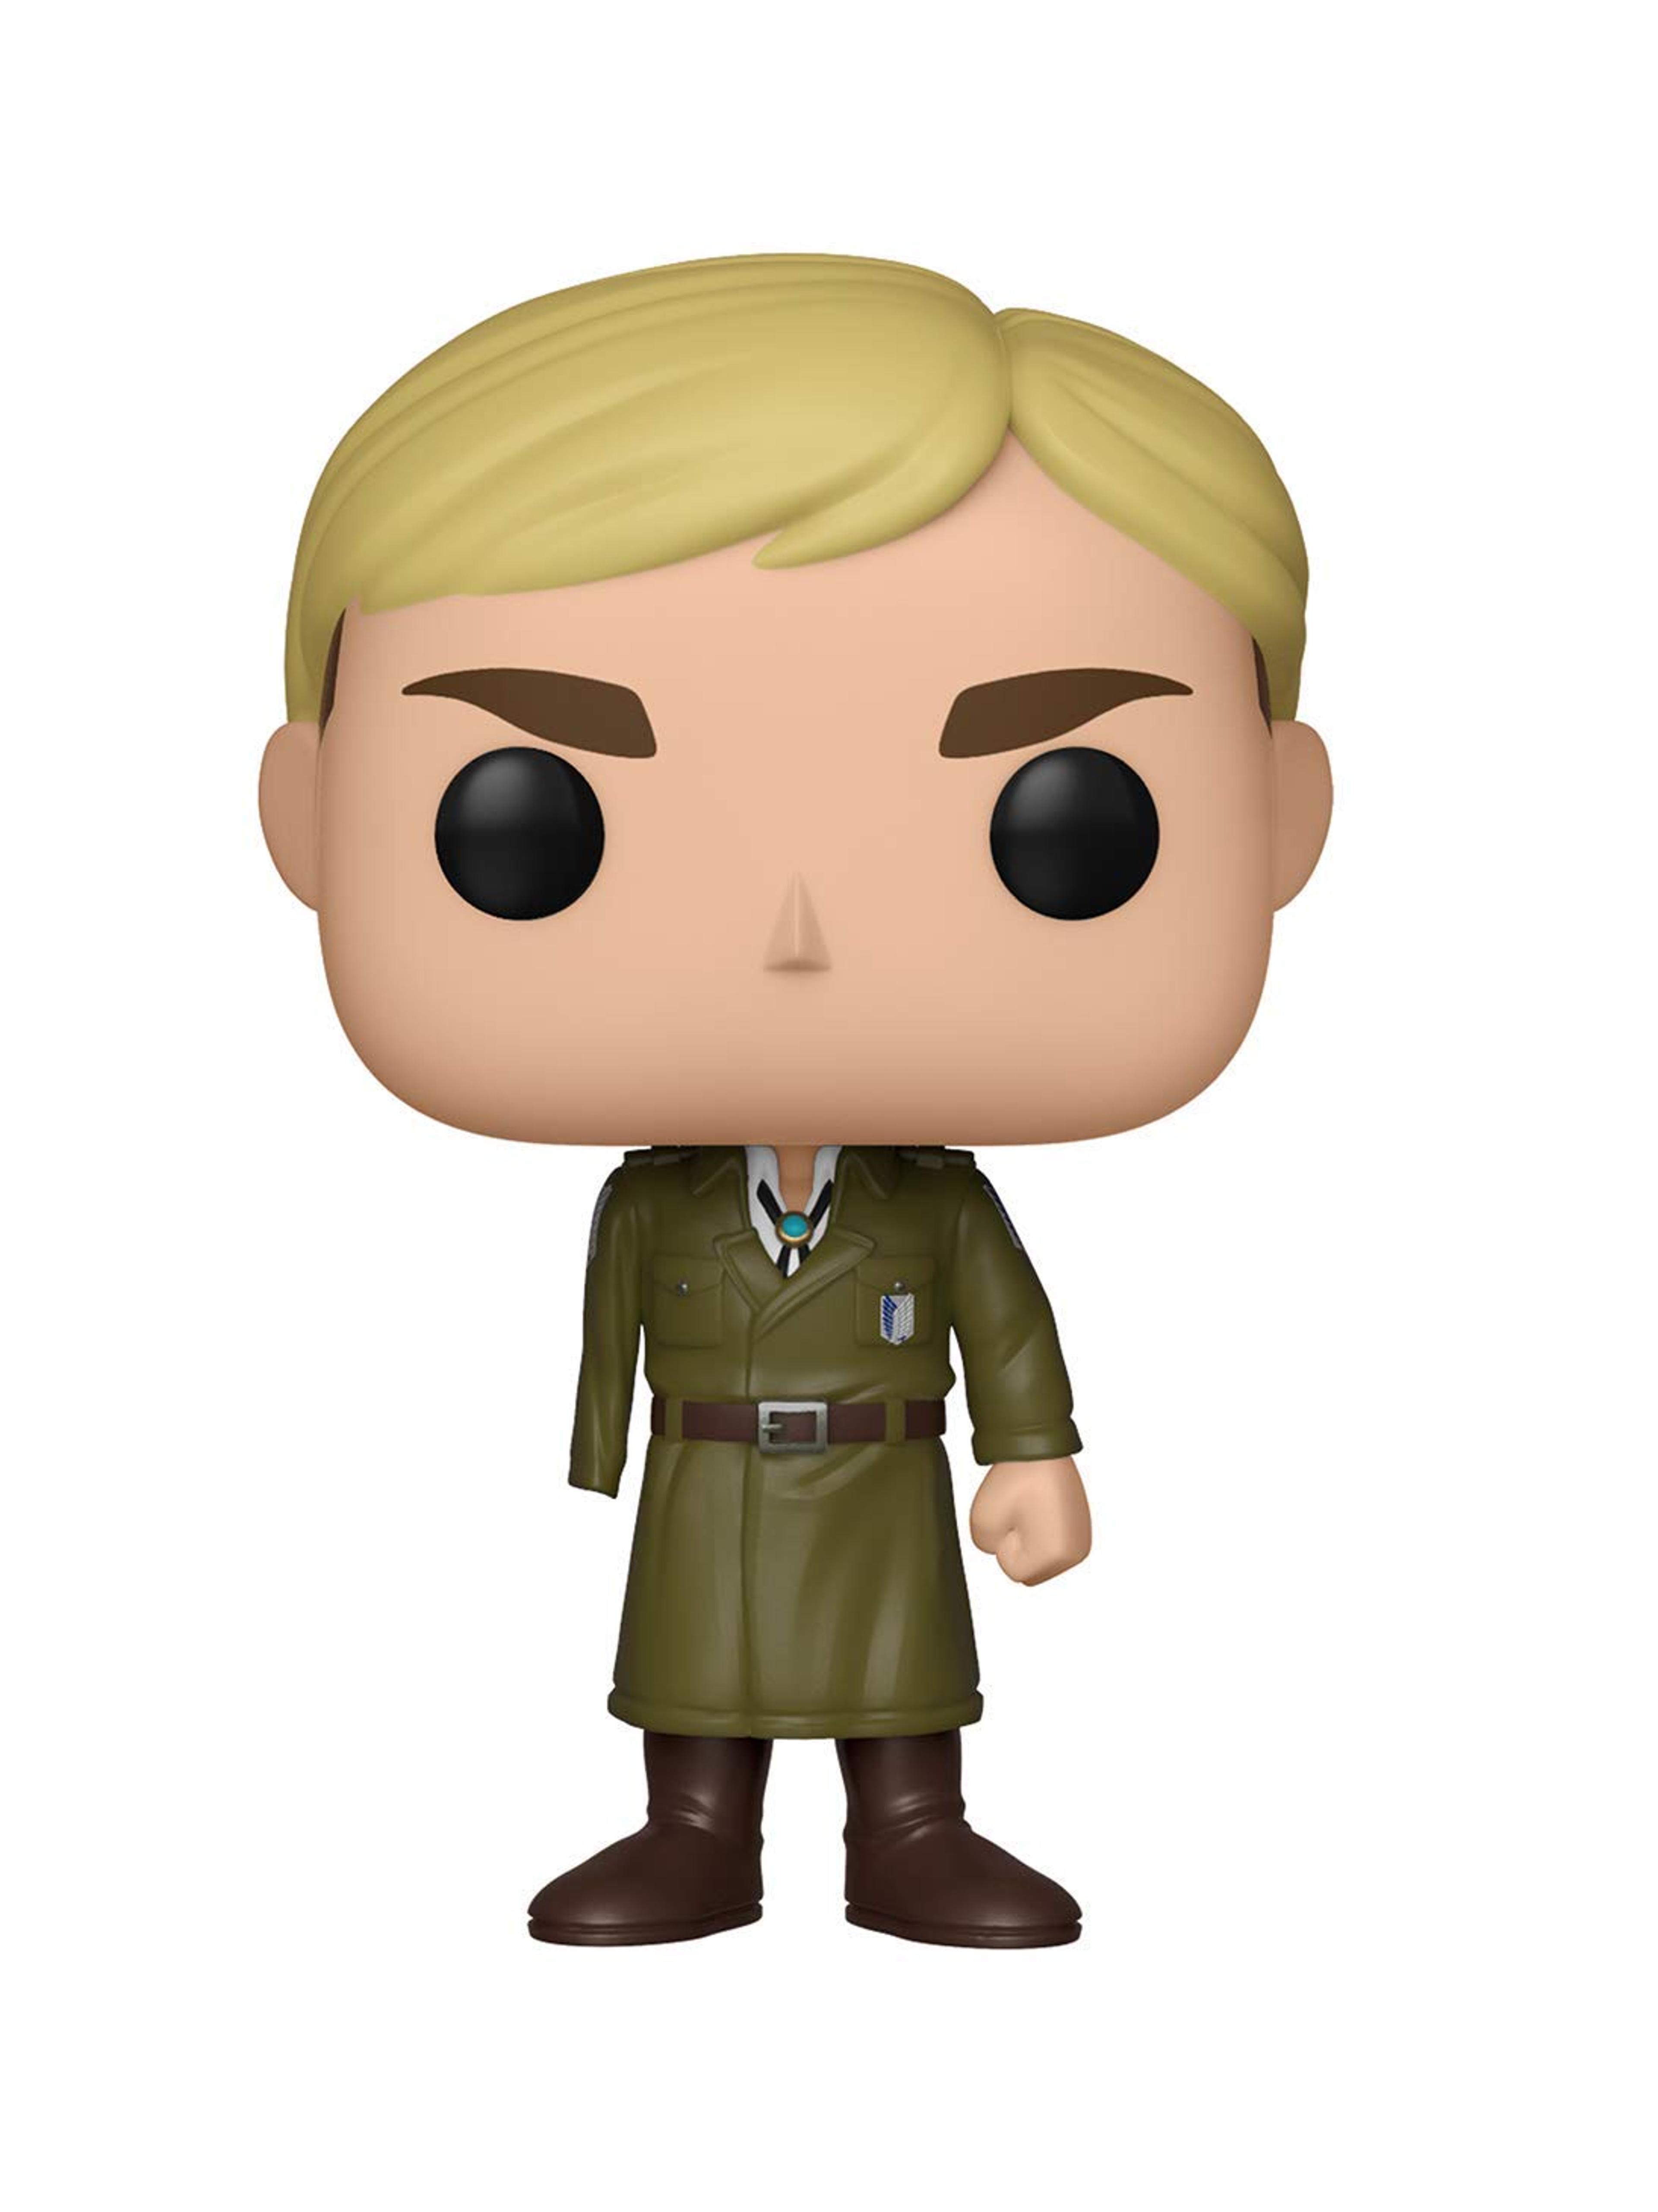 Alternate View 1 of Funko POP! Animation: Attack on Titan - Erwin (One-Armed)